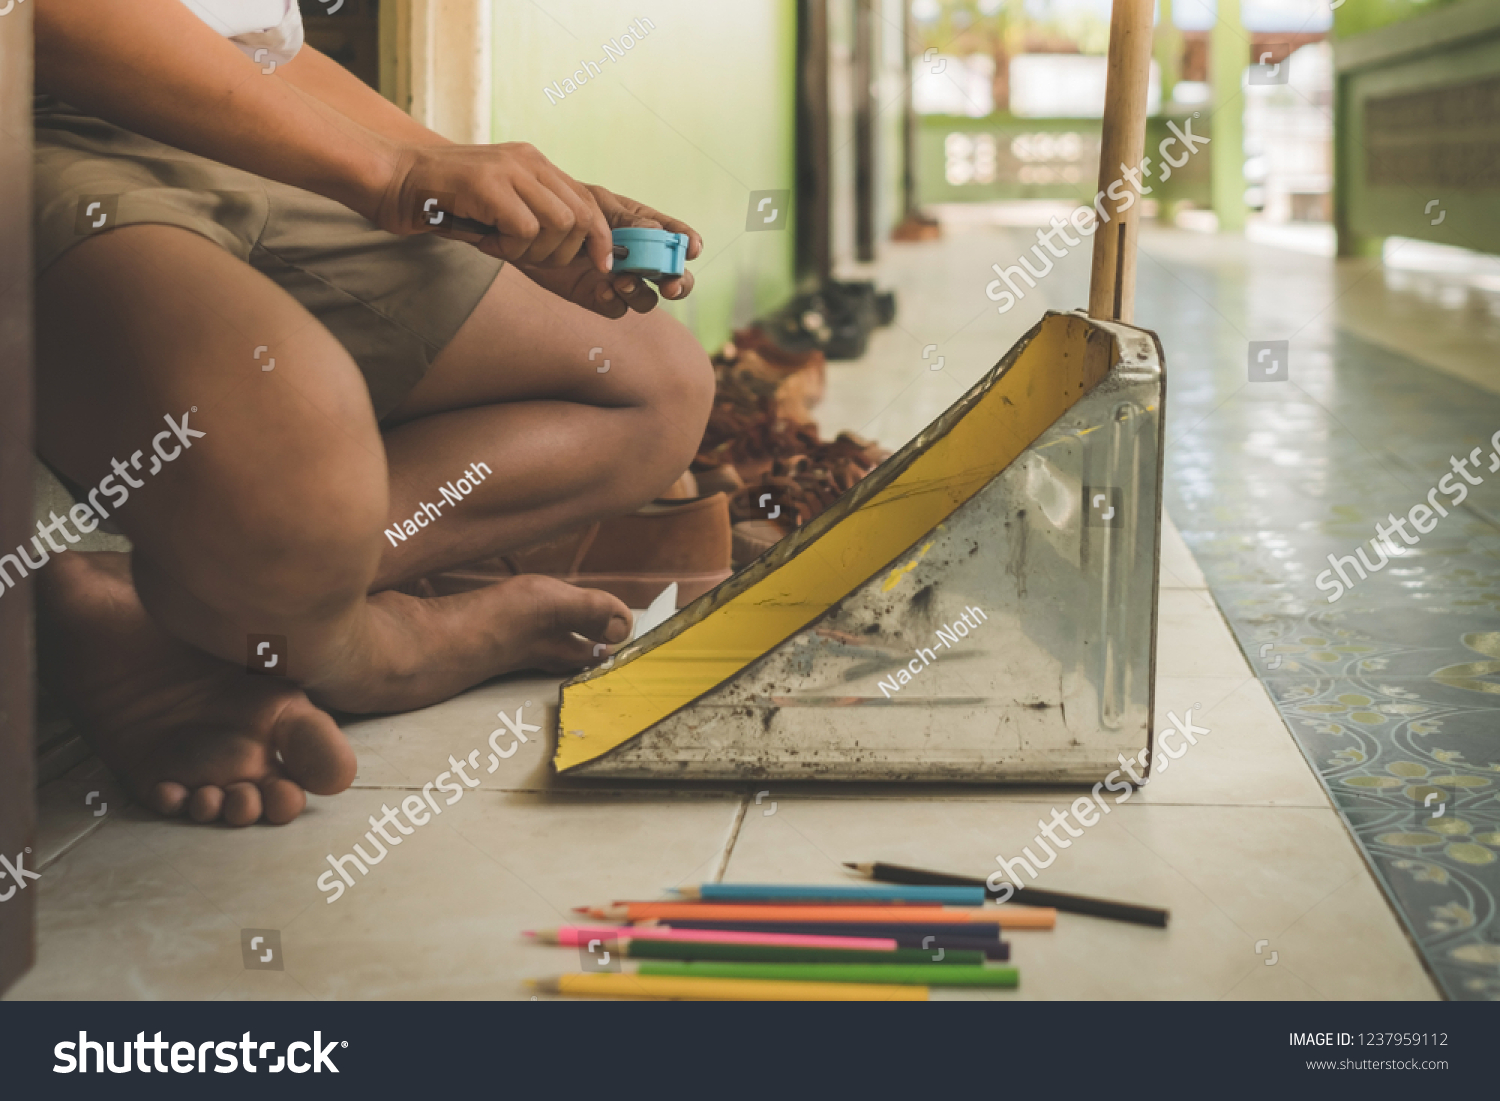 Elementary student sharpen the color pencil into the dustpan in front of classroom #1237959112